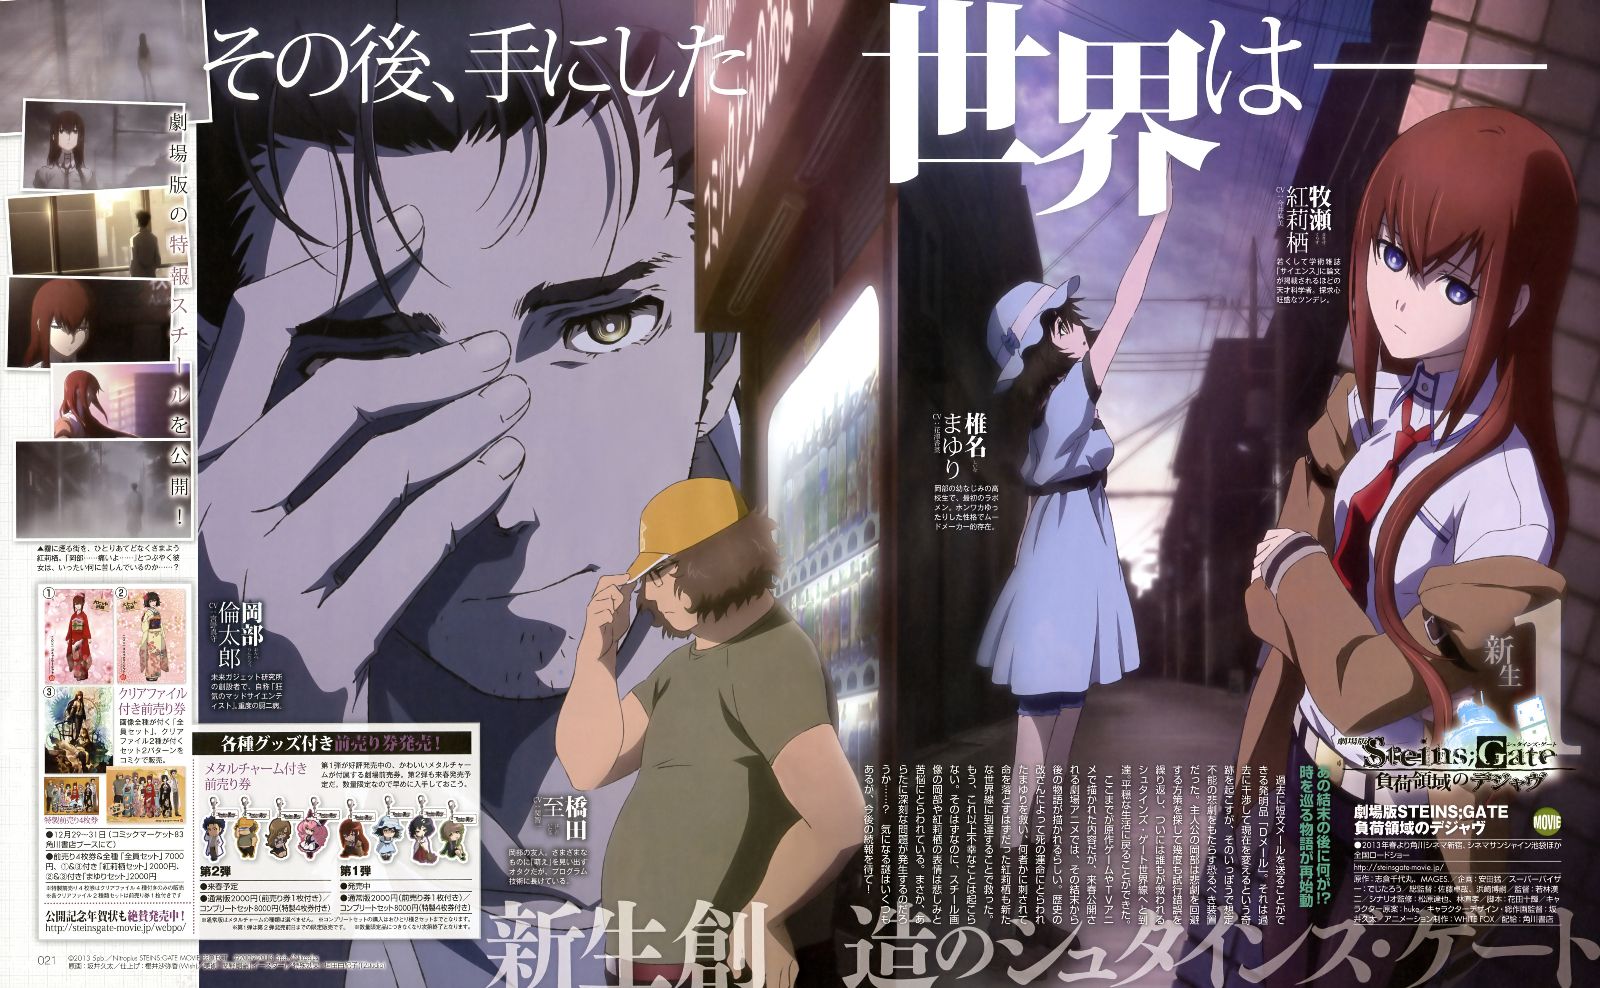 New Steins;Gate Movie Images pic 2